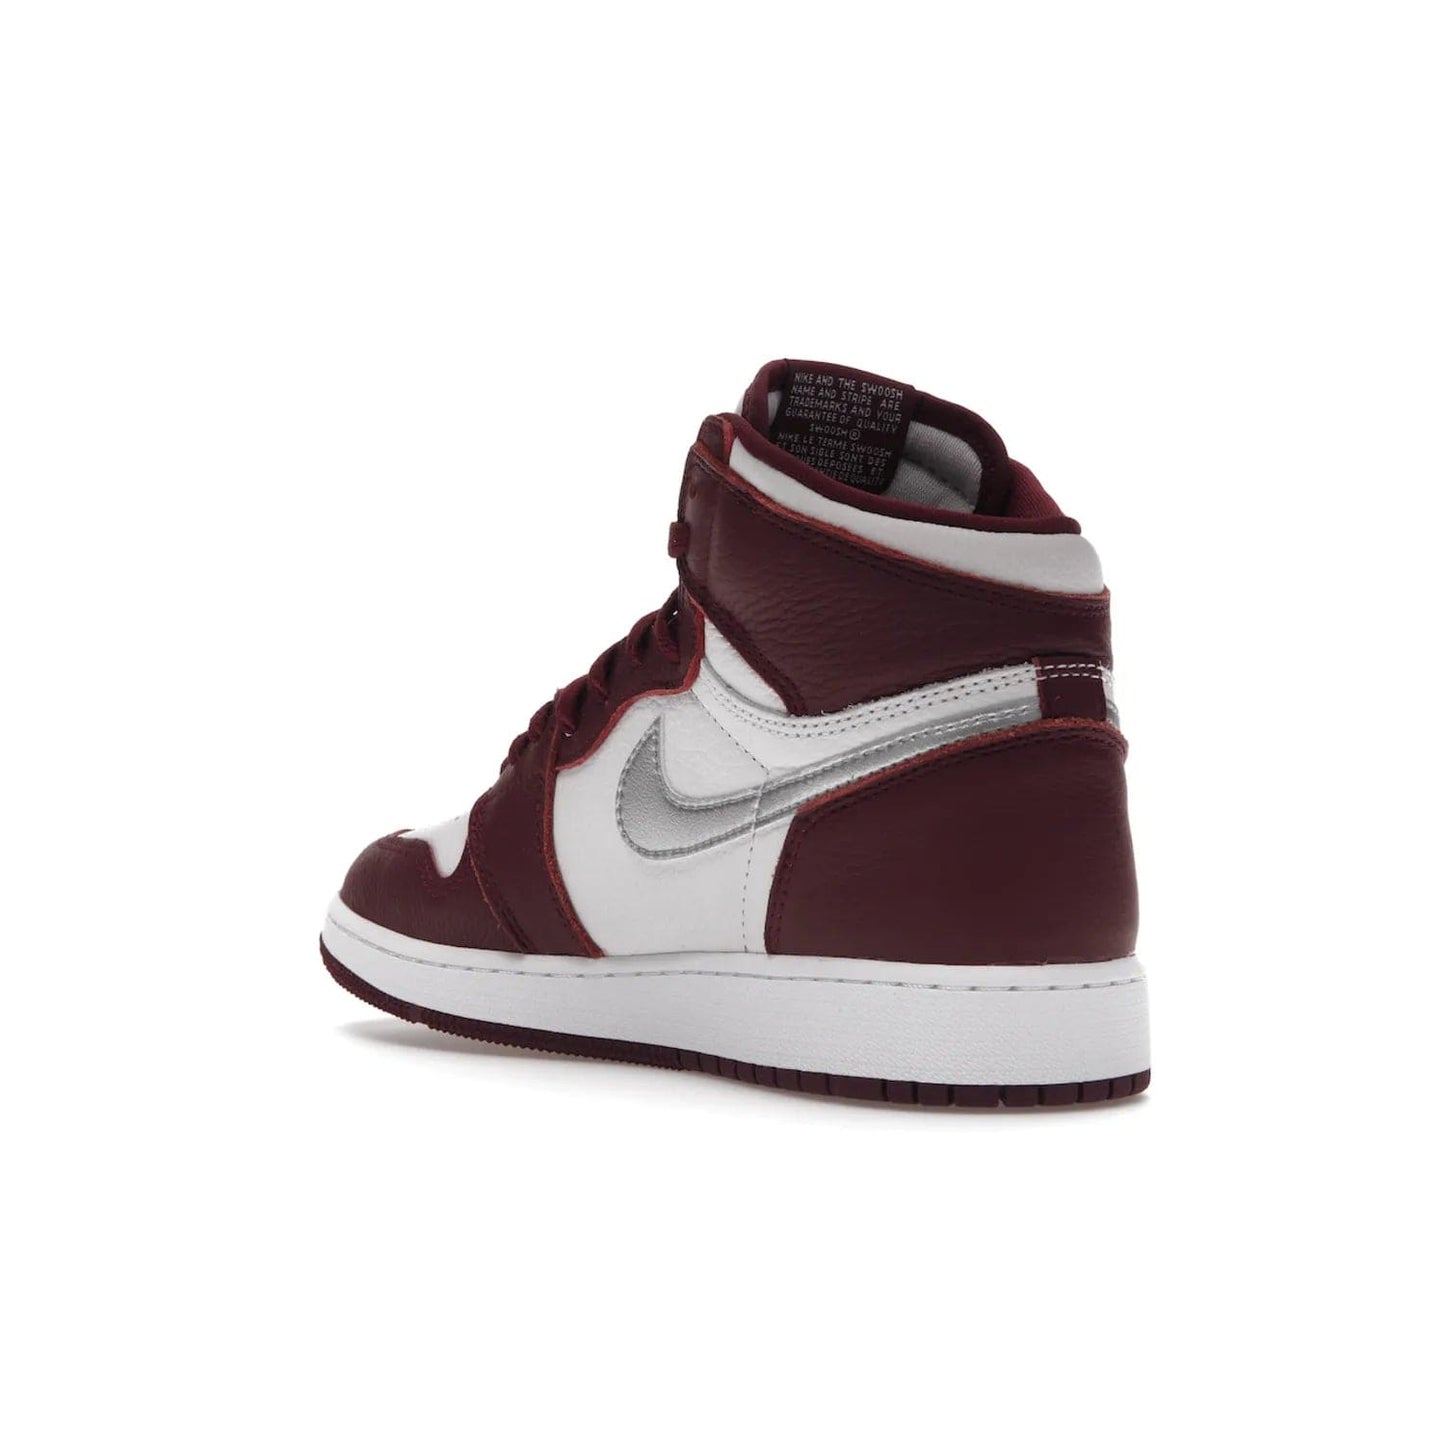 Jordan 1 Retro High OG Bordeaux (GS) - Image 24 - Only at www.BallersClubKickz.com - #
Introducing the Air Jordan 1 Retro High OG Bordeaux GS – a signature colorway part of the Jordan Brand Fall 2021 lineup. White leather upper & Bordeaux overlays, metallic silver swoosh, jeweled Air Jordan Wings logo & more. Step up your style game with this sleek fall season silhouette.